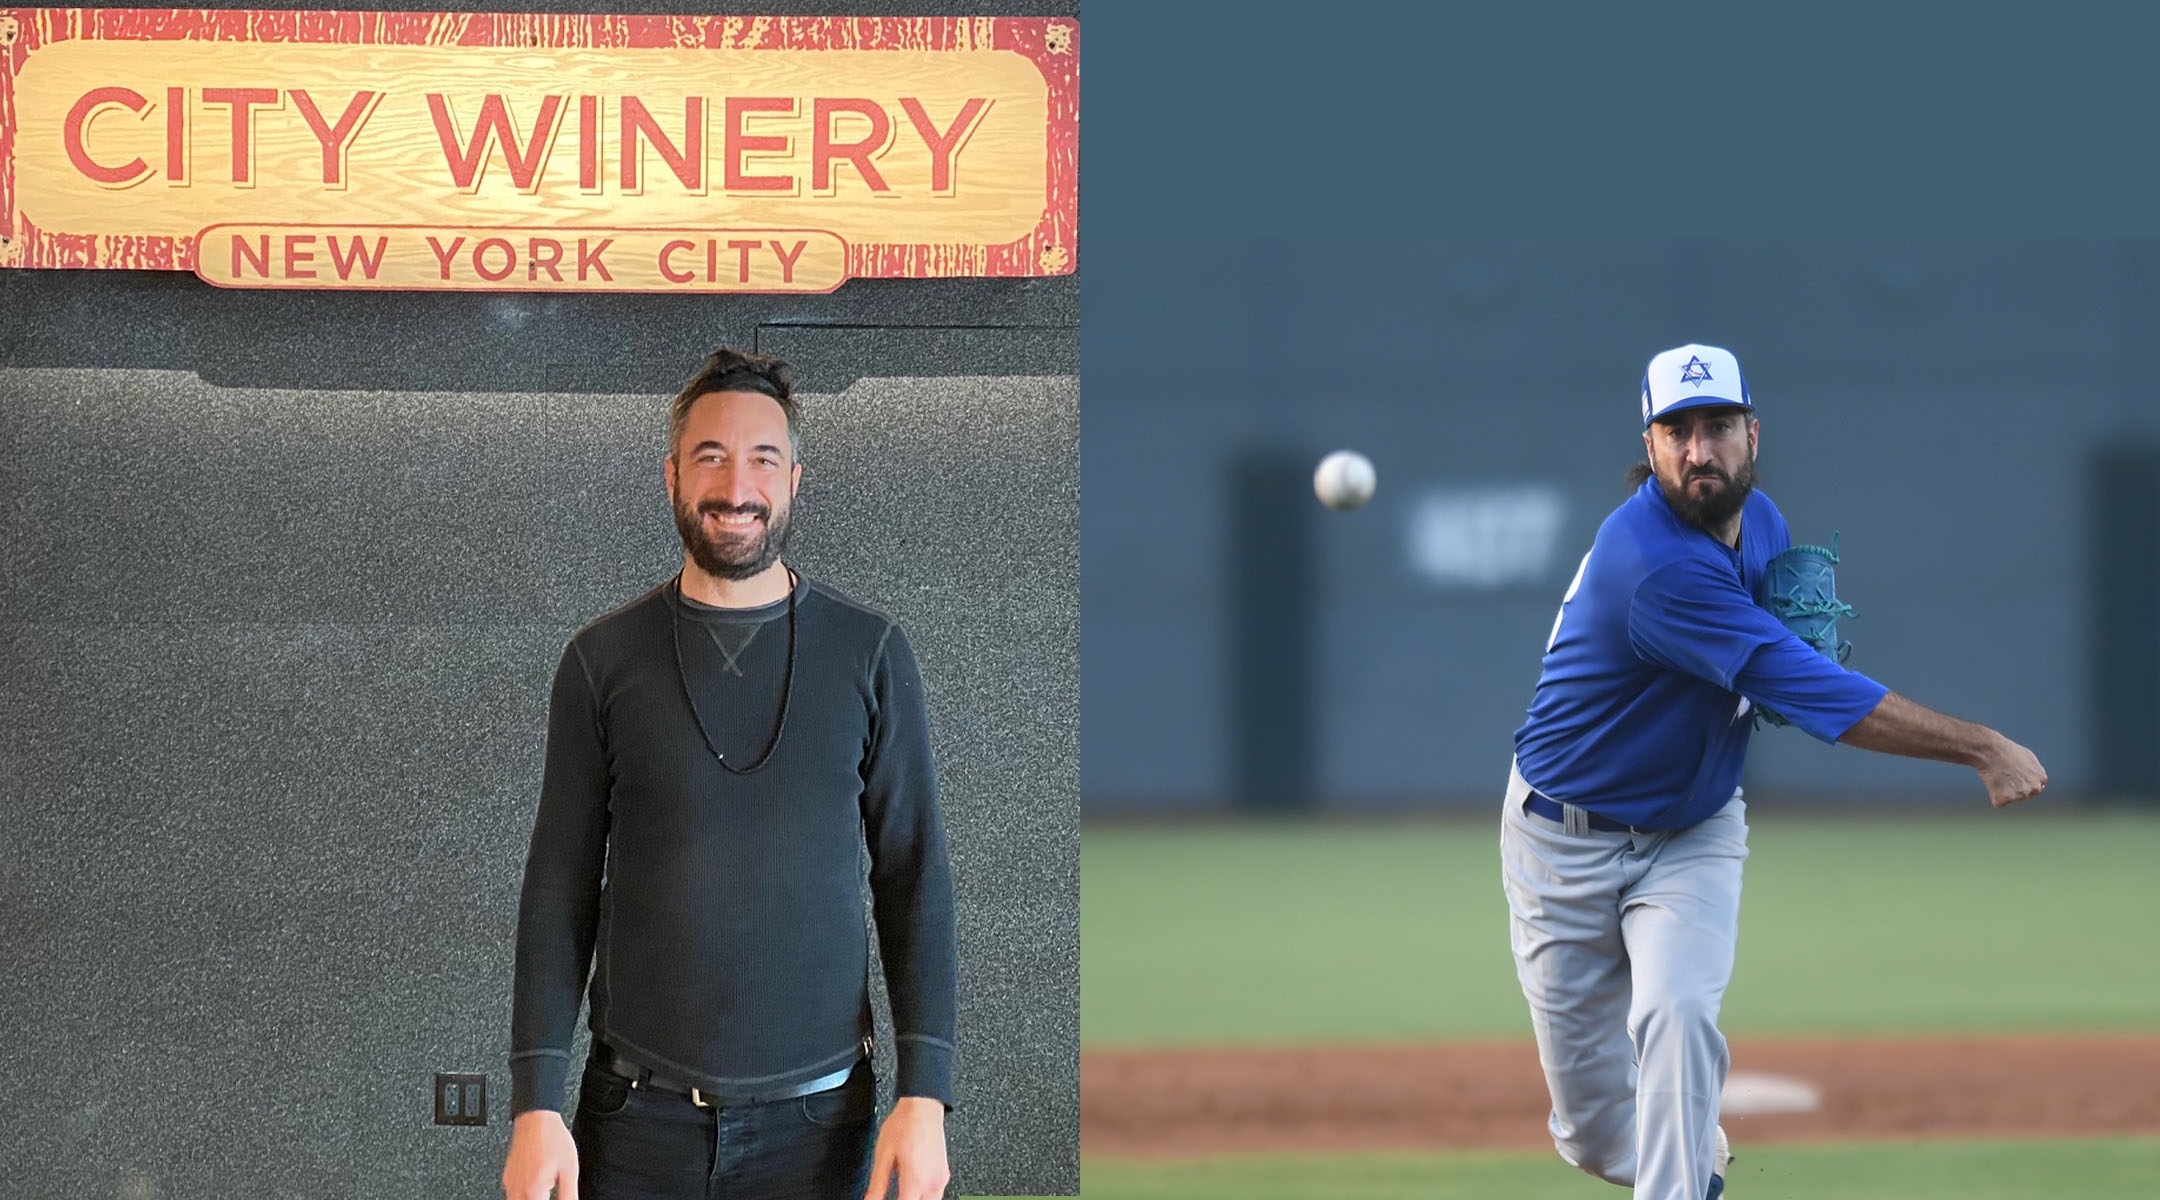 Former Big League Pitcher Now a Winemaker